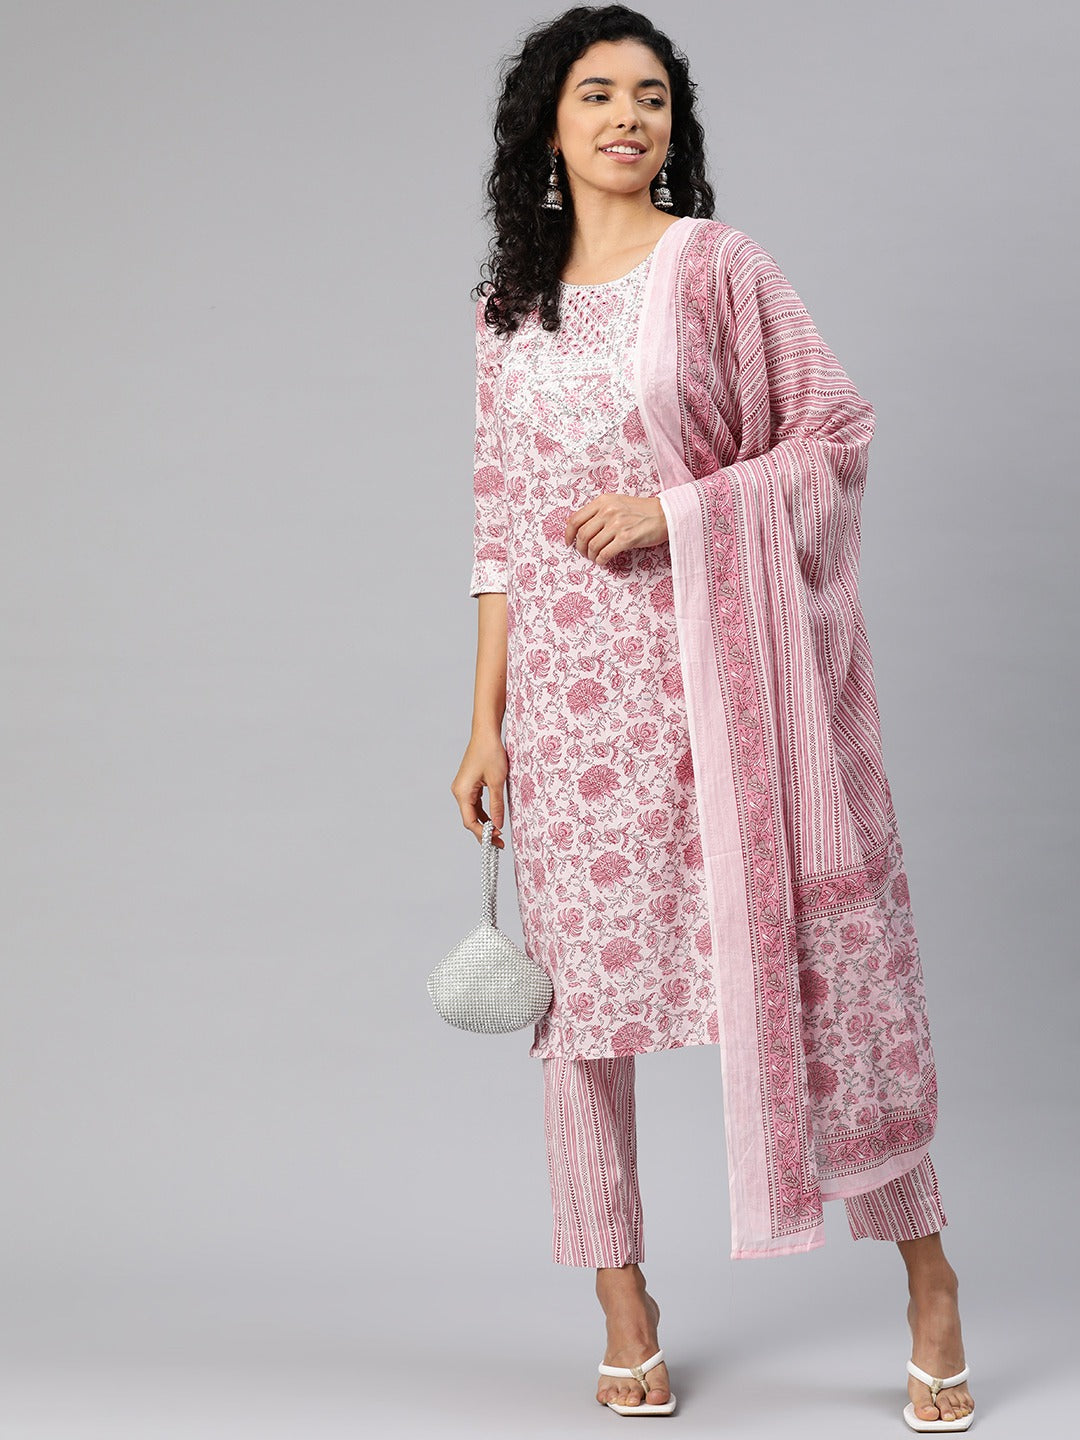 Straight Style Cotton Fabric Pink Color Kurta And Bottom With Dupatta